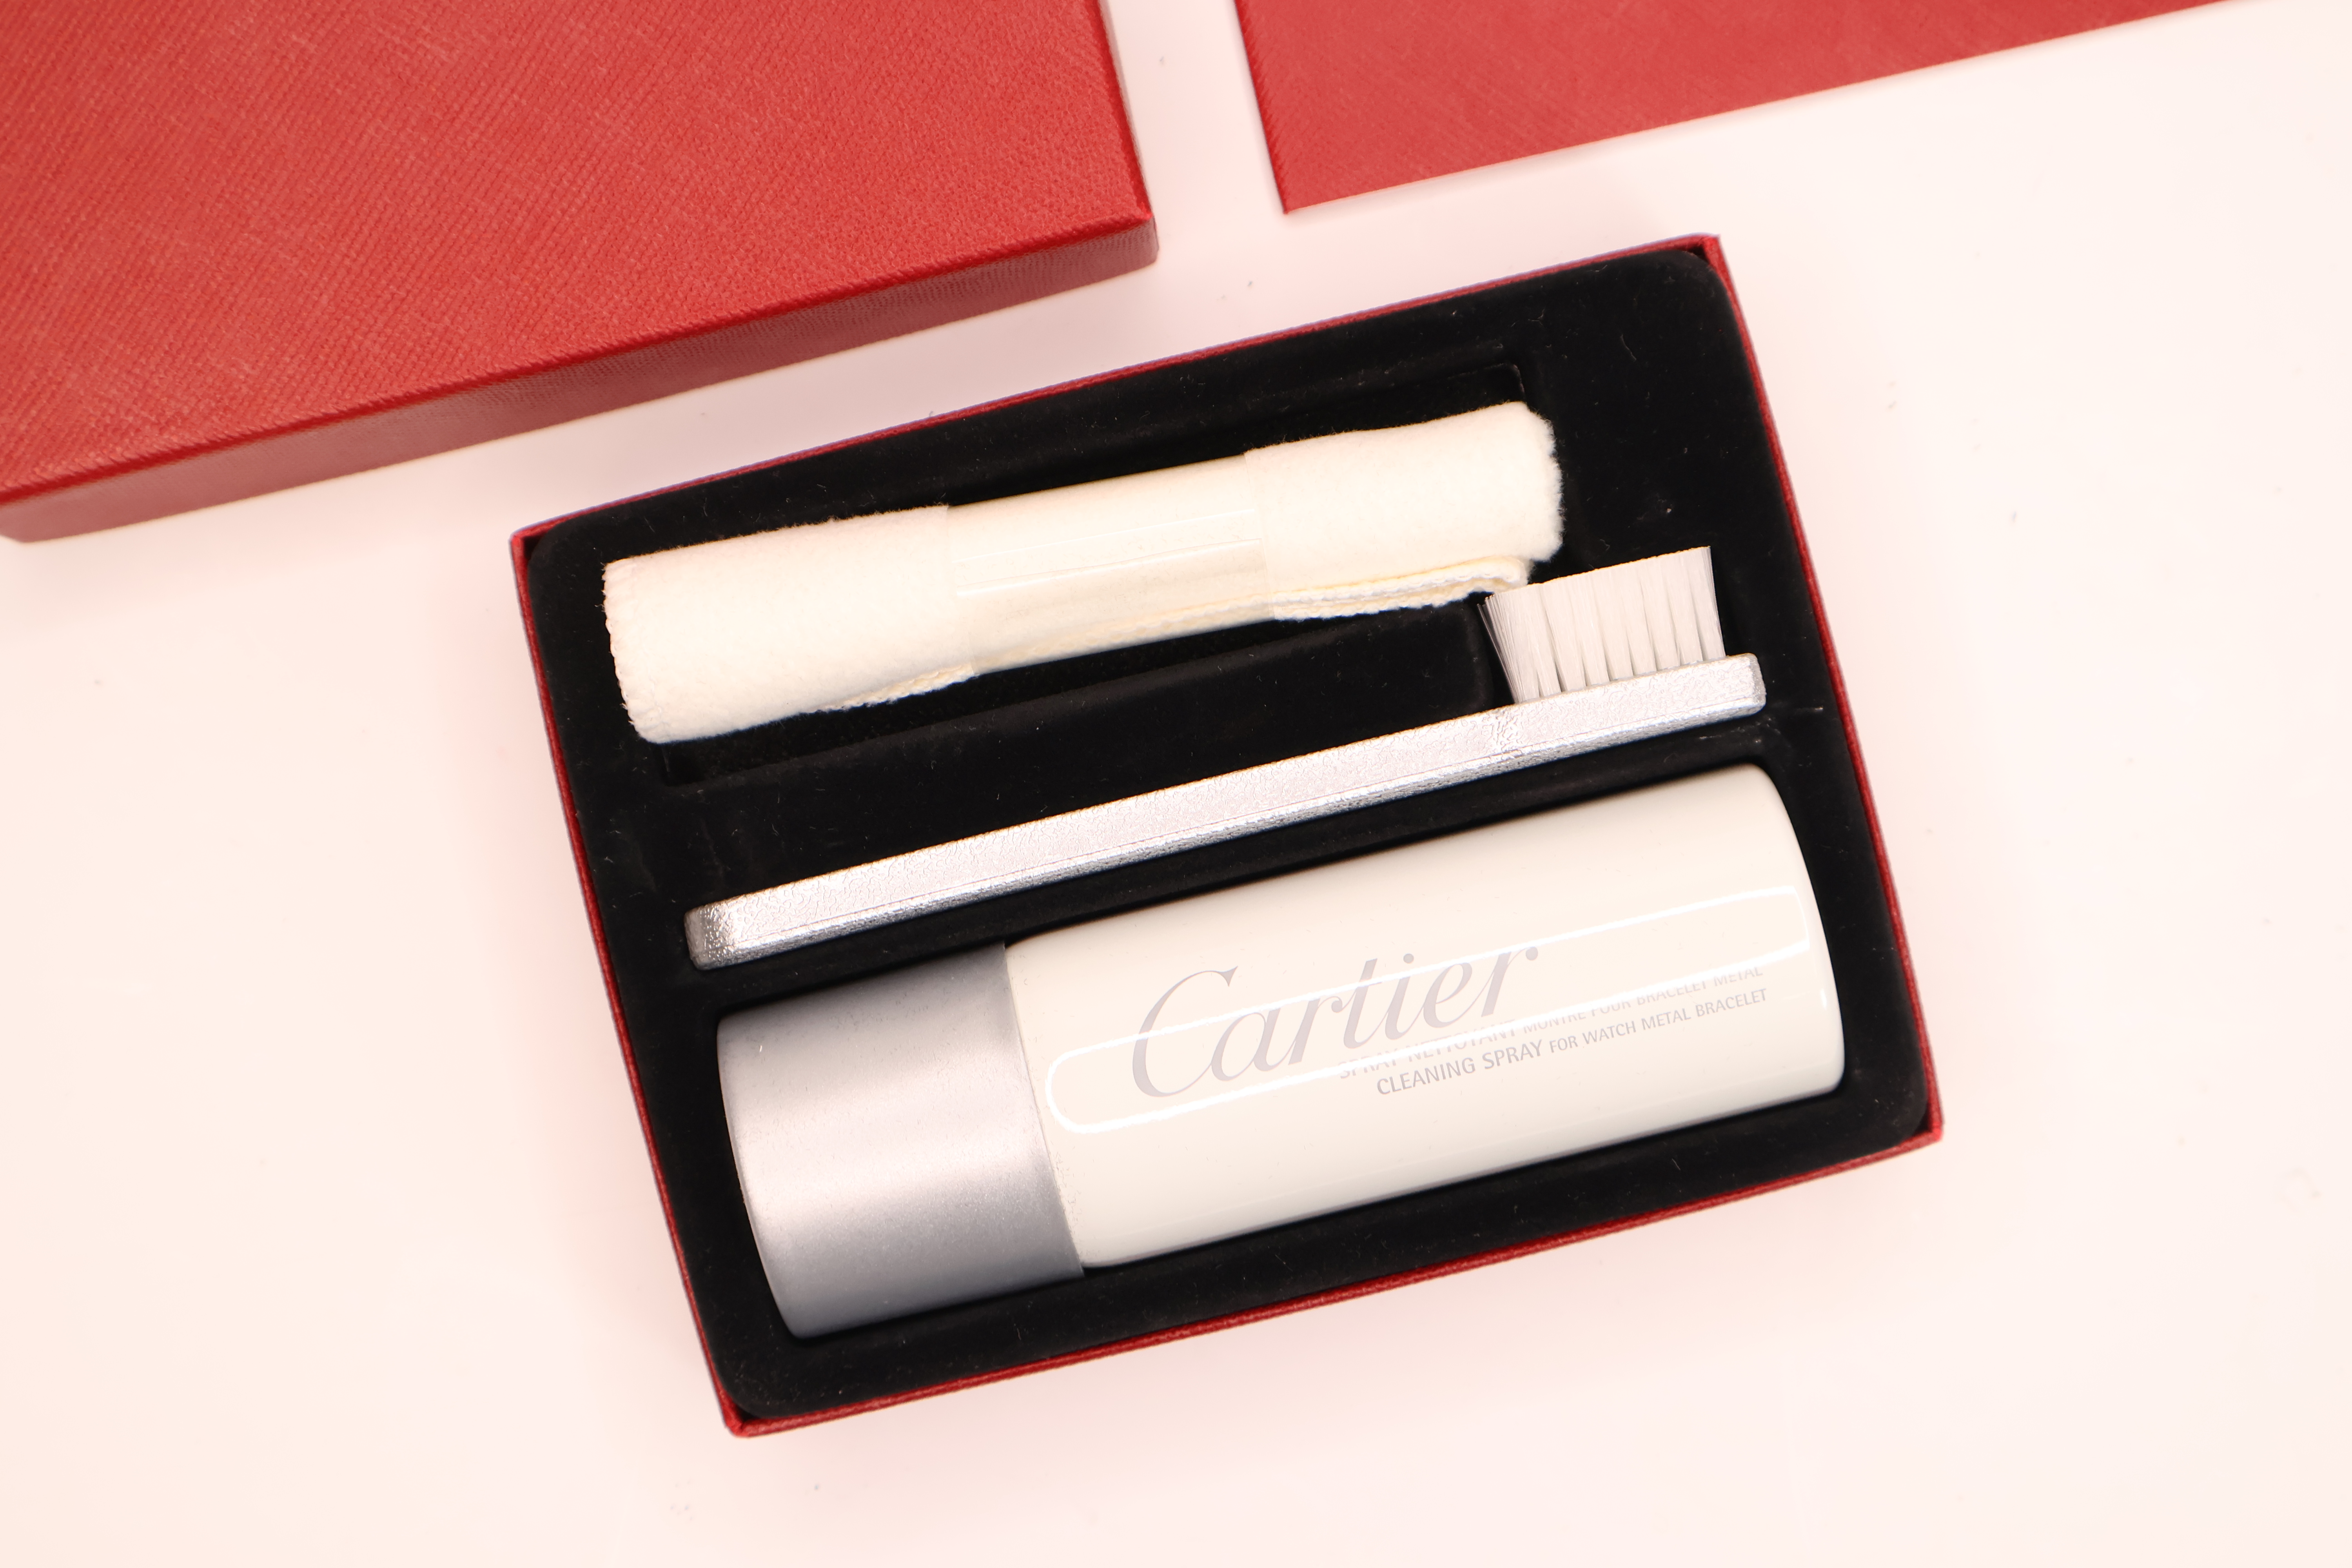 *To Be Sold Without Reserve* Cartier Cleaning Kit - Image 3 of 3